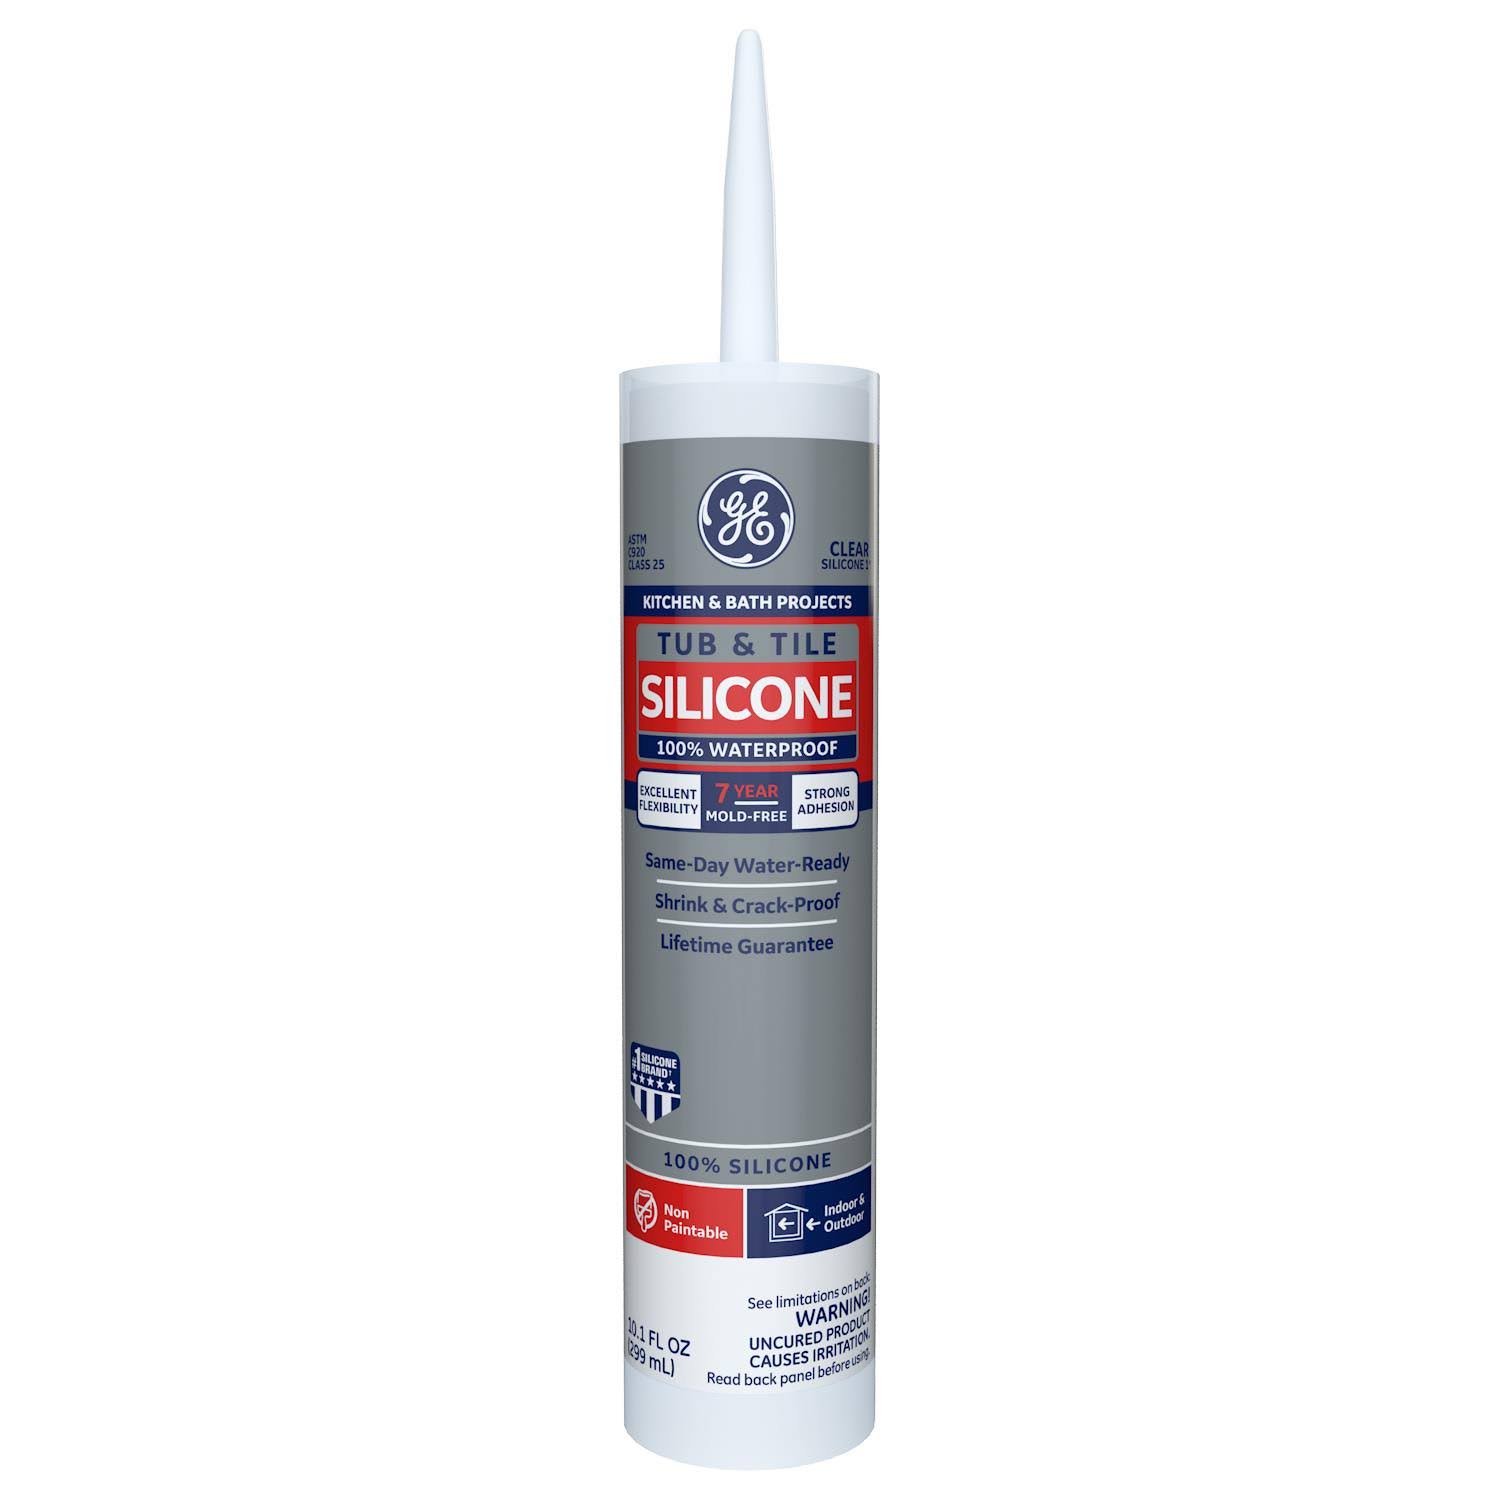 GE Silicones Kitchen and Bath Sealant - Clear, 10.1oz